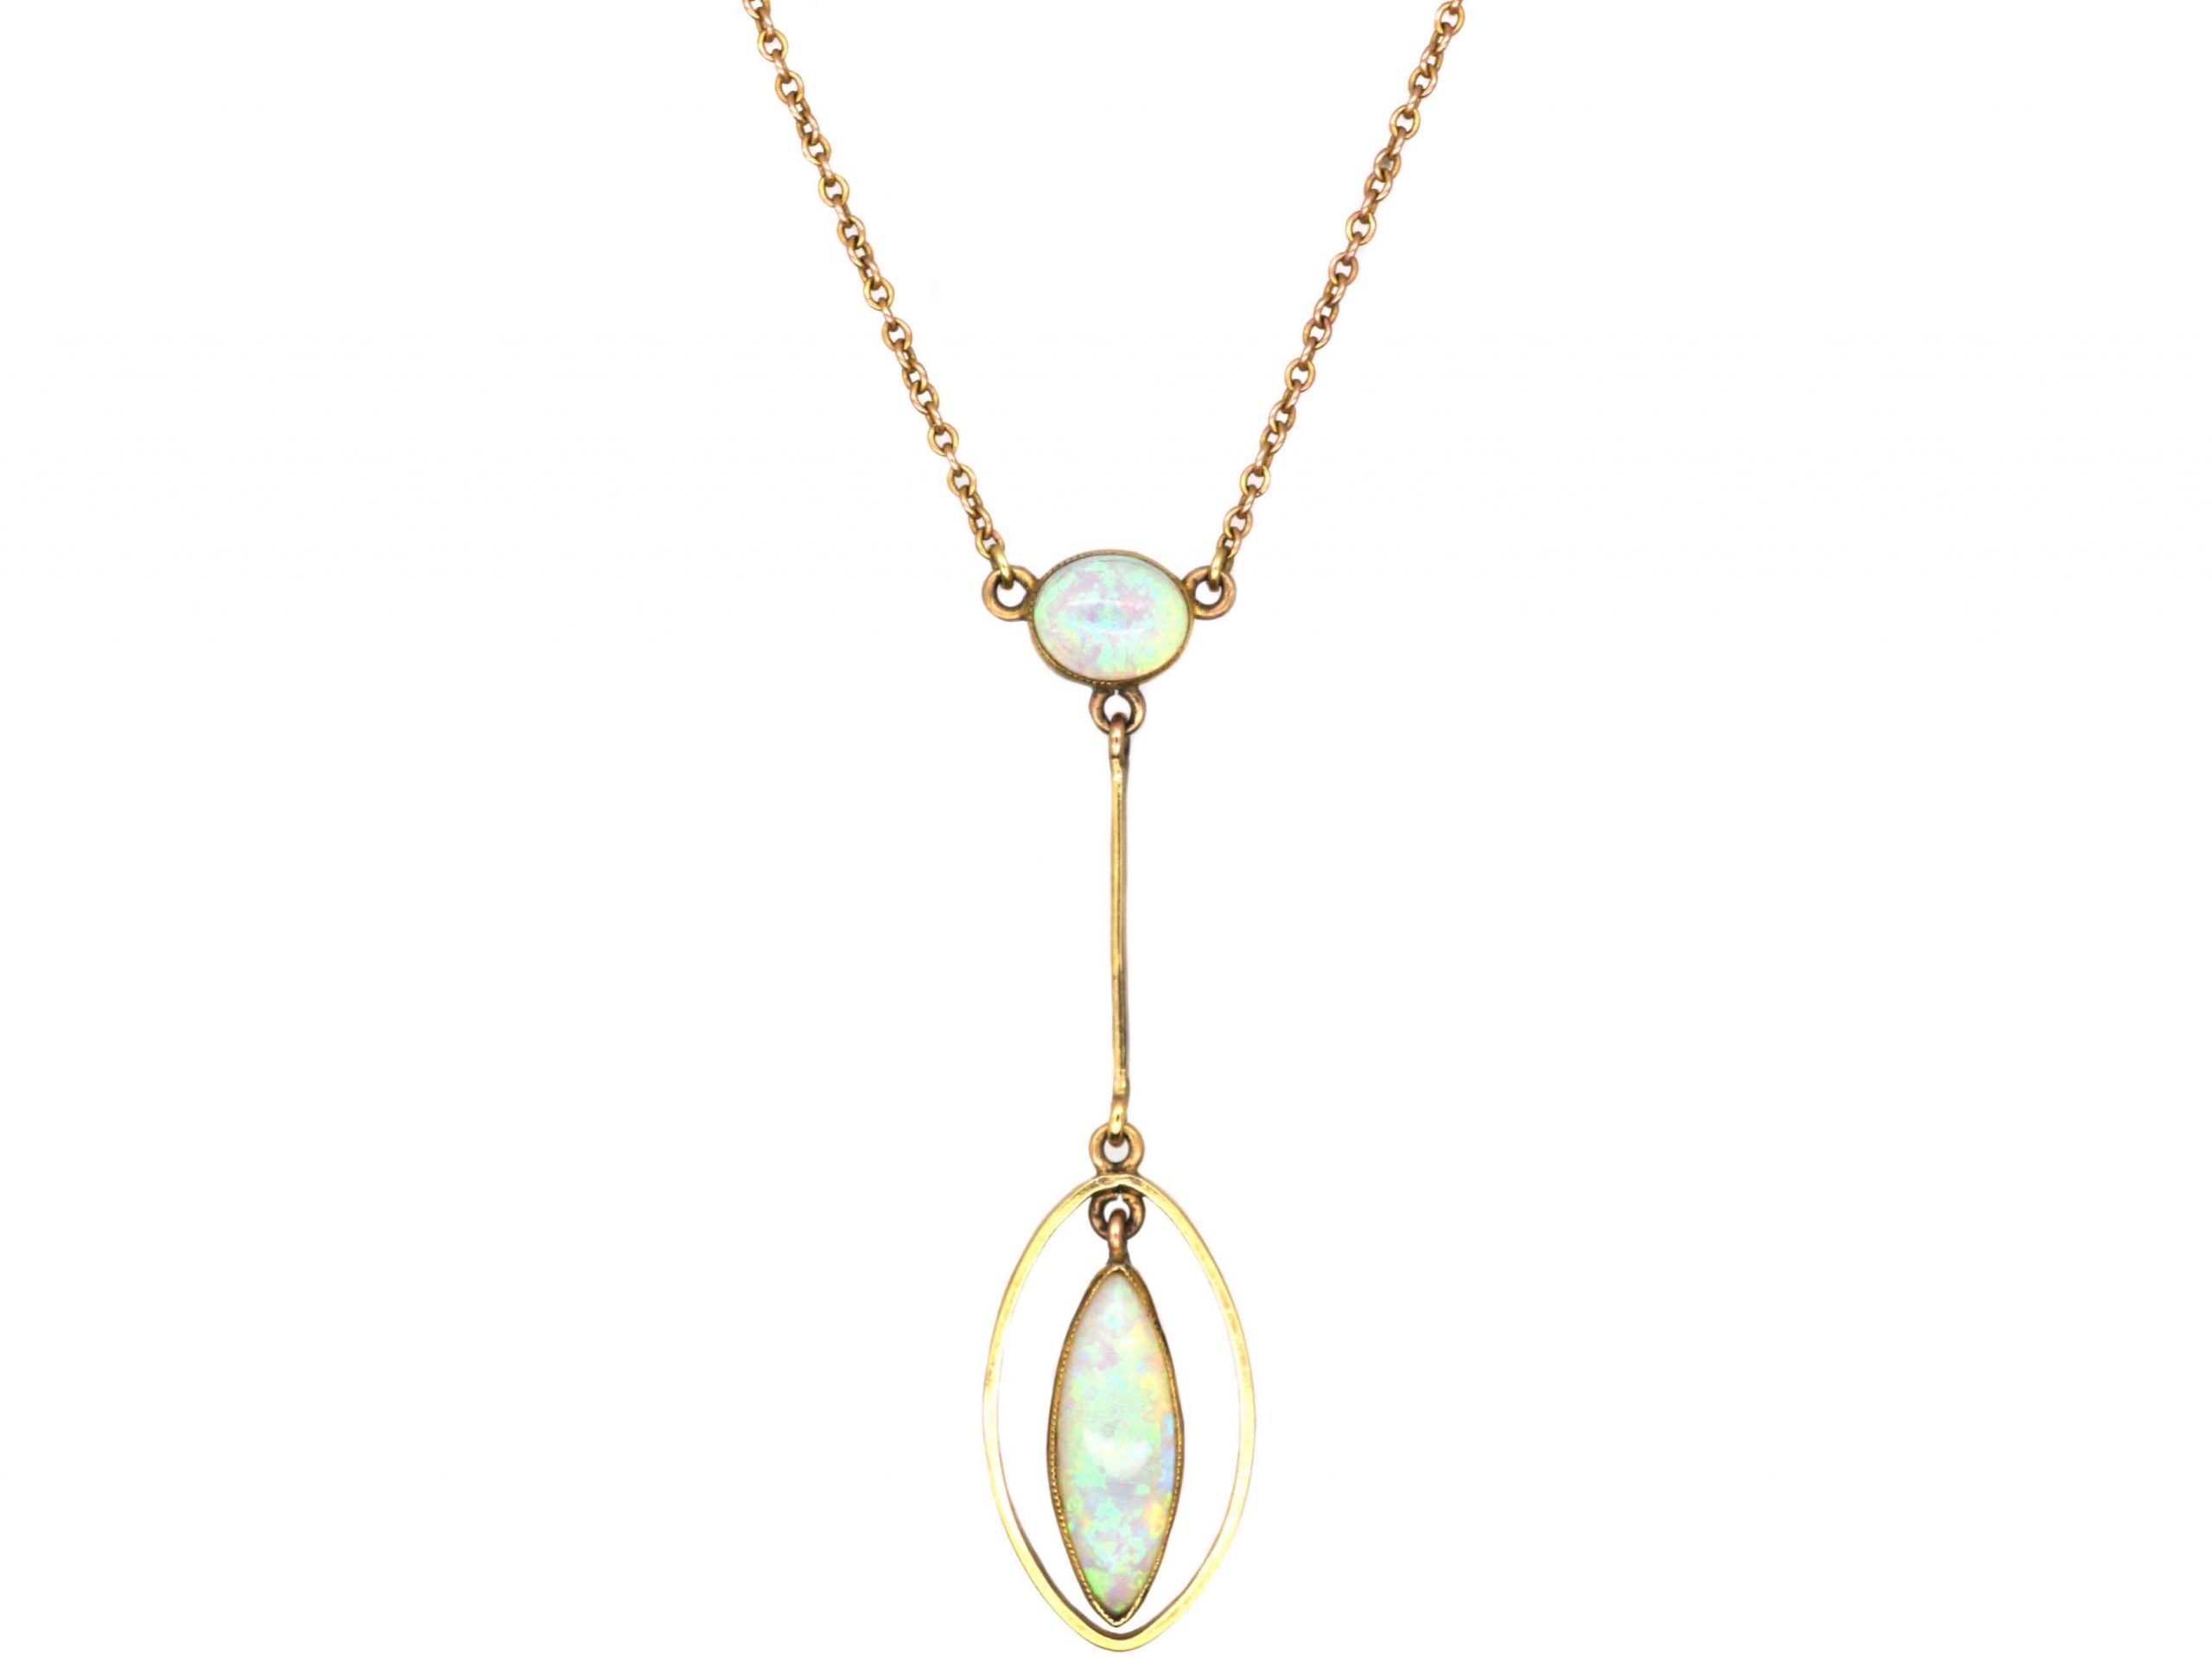 Edwardian 15ct Gold Necklace set with Two Opals (406U) | The Antique ...